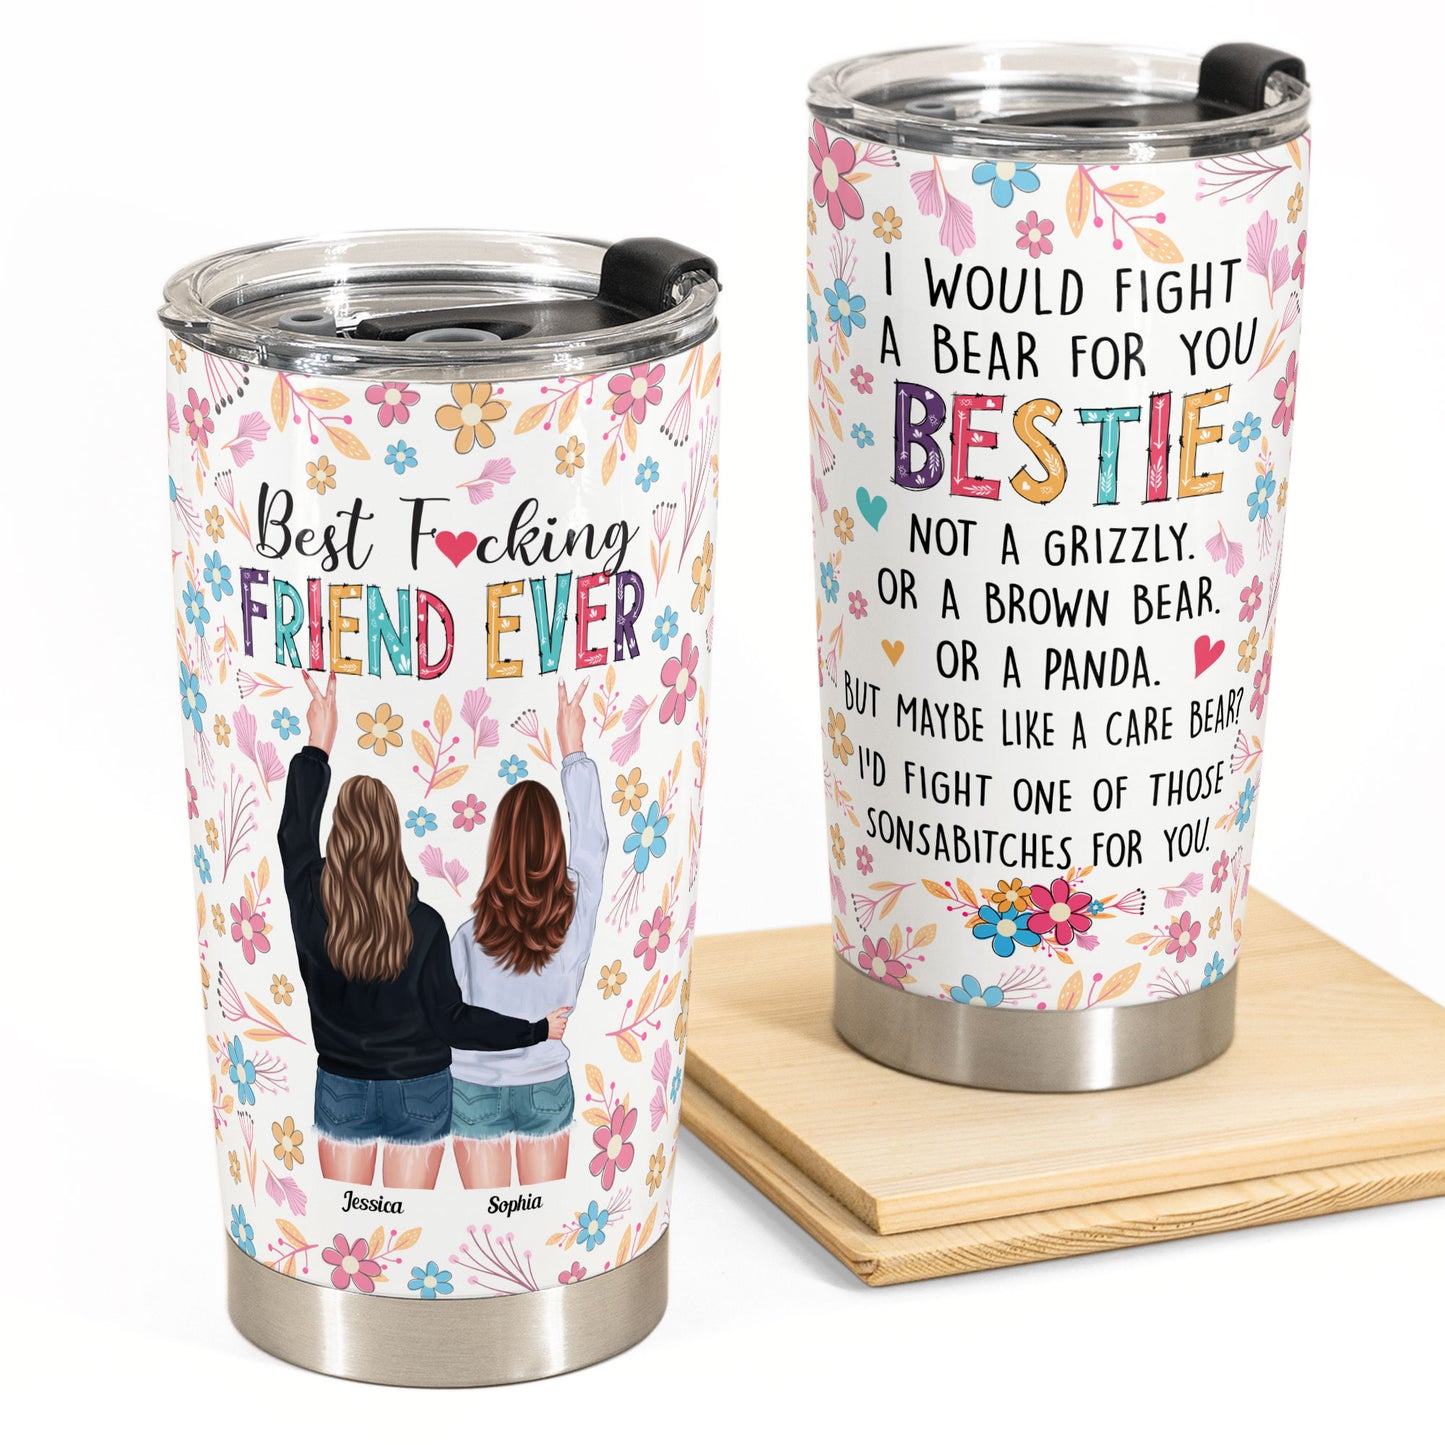 Best Friend Forever I'd Fight A Bear For You - Personalized Tumbler Cup -  Funny Birthday Friendship Gifts For Besties, BFF, Best Friends, Soul Sisters